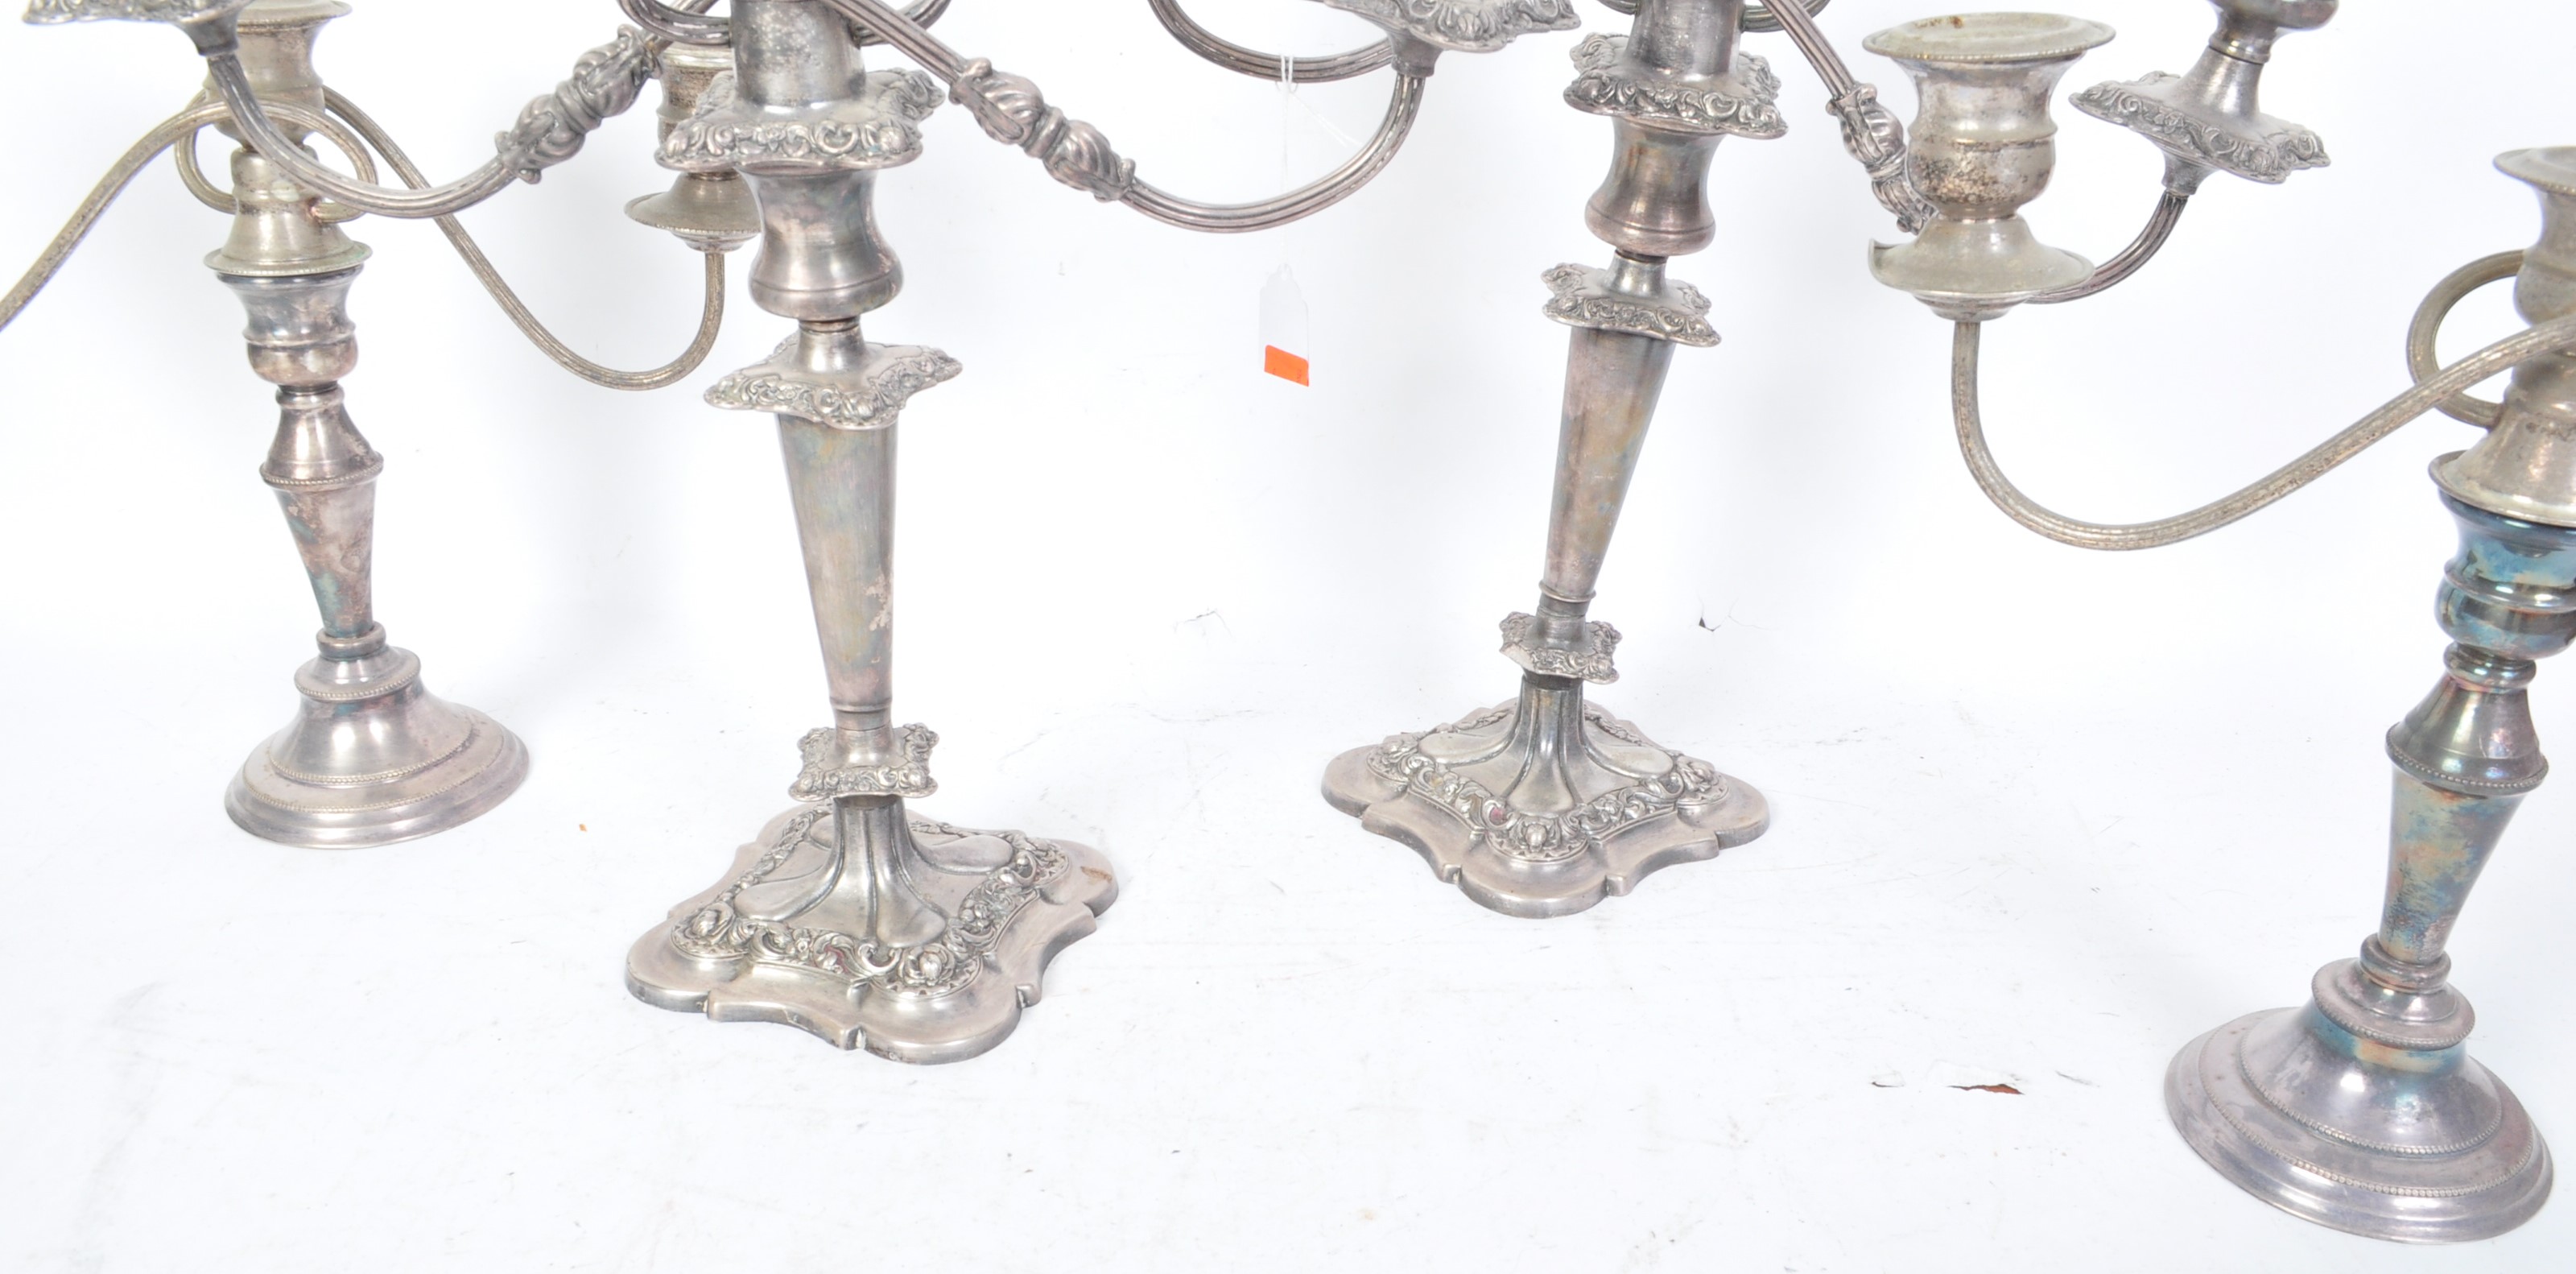 TWO PAIRS OF EARLY 20TH CENTURY SILVER PLATED CANDELABRA - Image 6 of 6